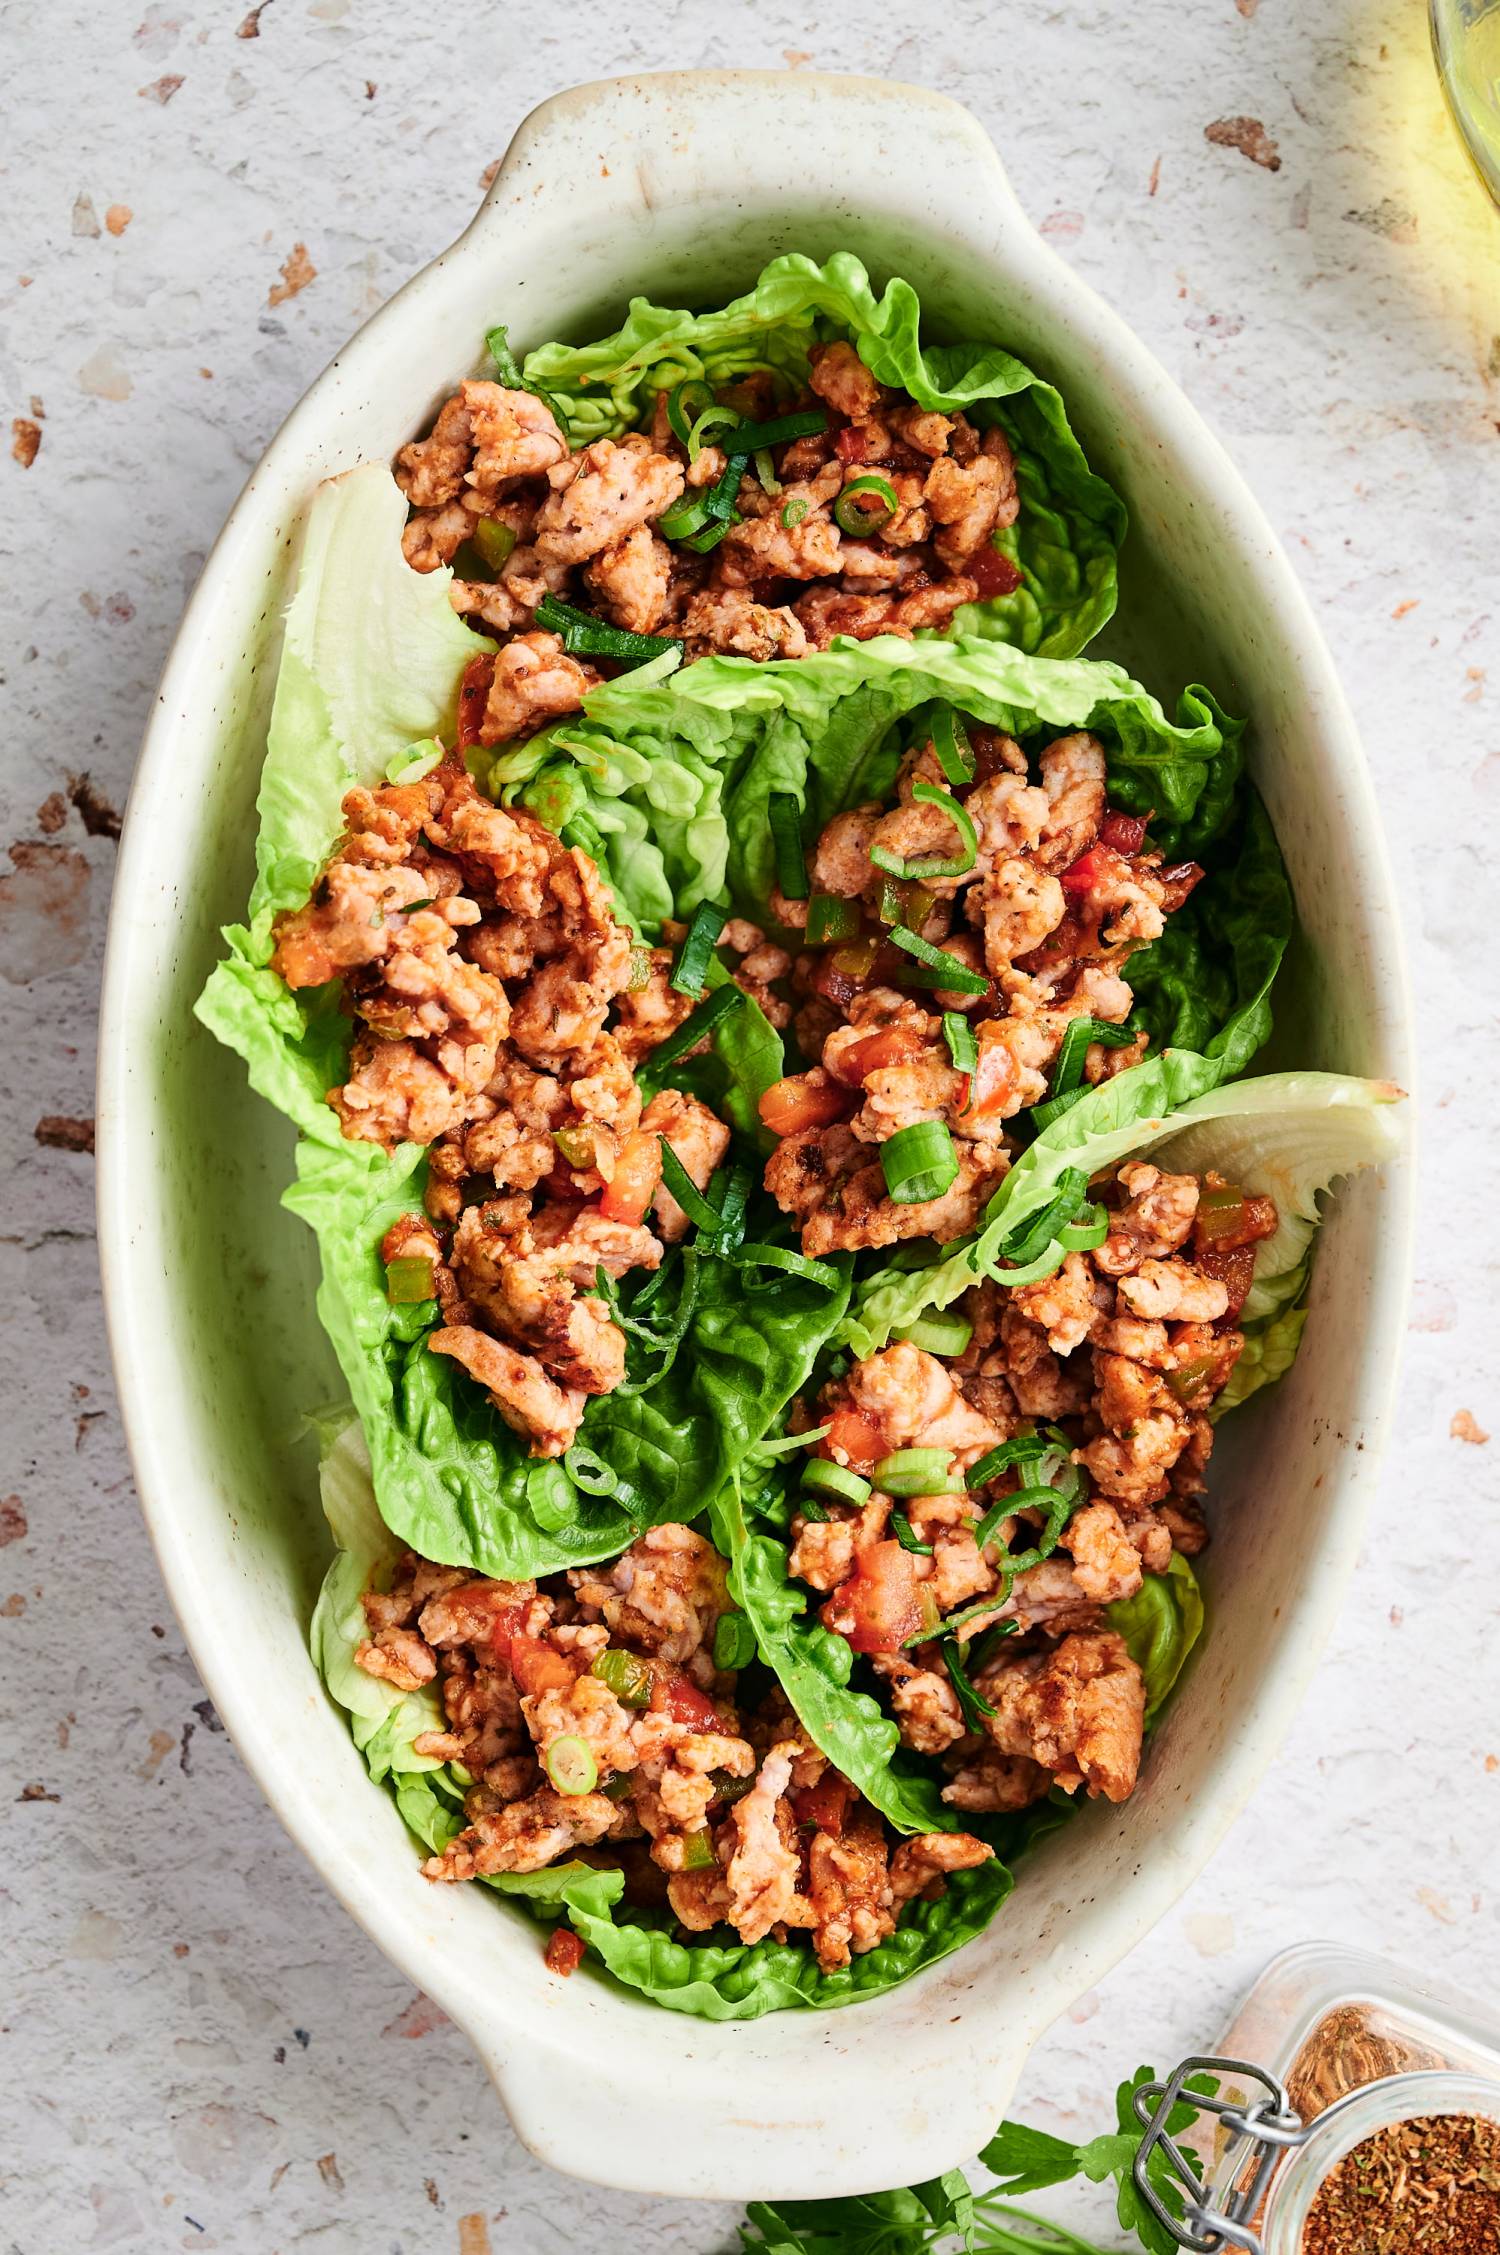 Ground turkey taco lettuce wraps in Romaine lettuce served in a white dish.